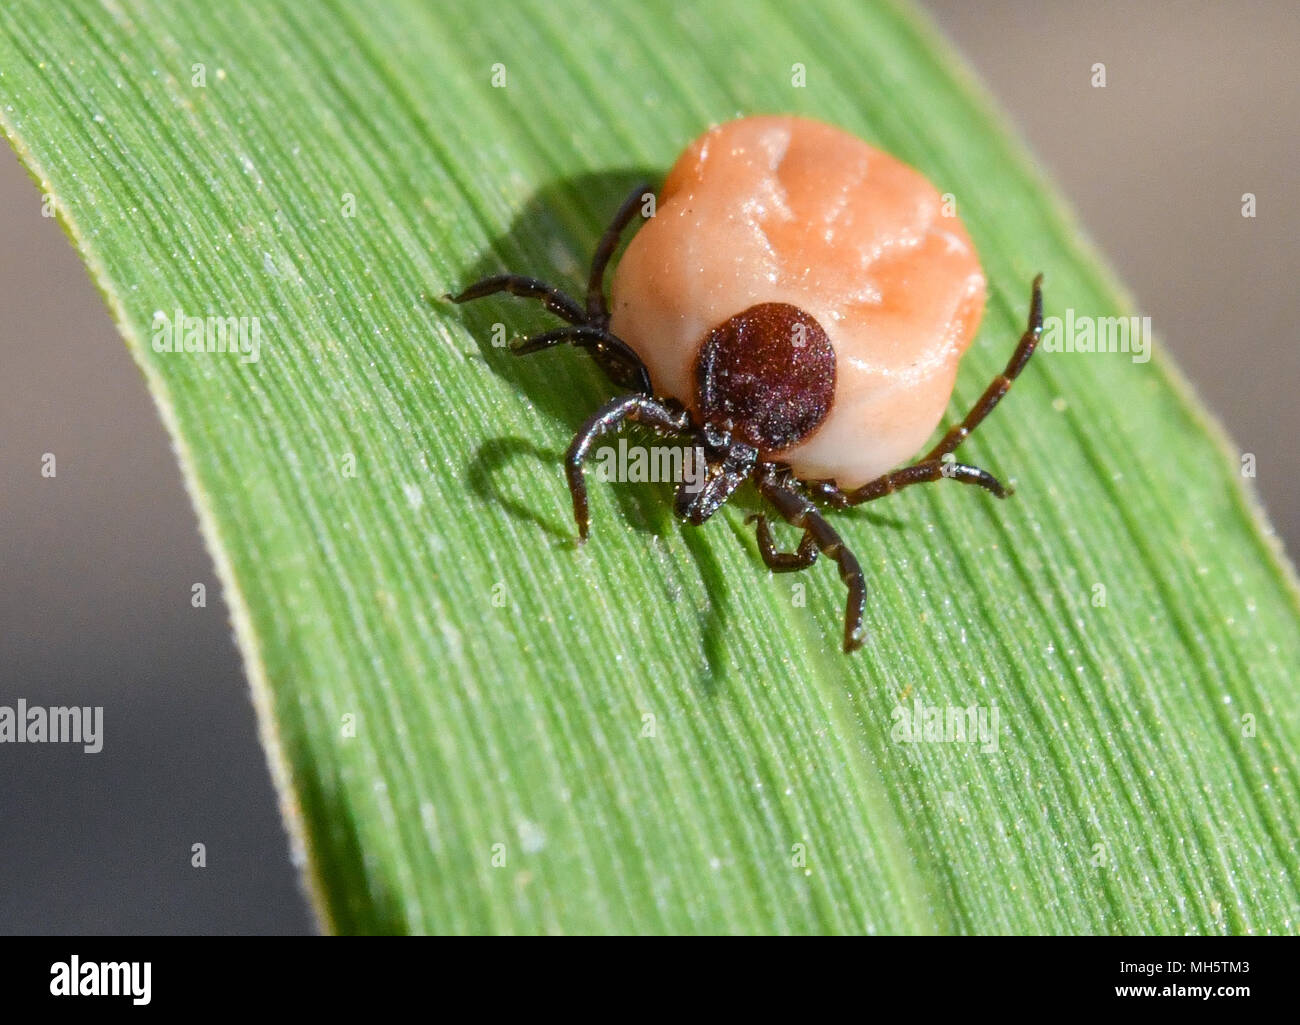 29 April 2018, Germany, Sieversdorf: A saturated tick crawls up a leaf. Ticks, which normally lurk in the meadows, love temperatures above 7°C and more than 80% of air humidity. They prefer warm and humid spaces, finding their habitat to be typically in the forest. Tick bites can cause borreliosis, leading to hinge, heart and nerve infections. Photo: Patrick Pleul/dpa-Zentralbild/ZB Stock Photo